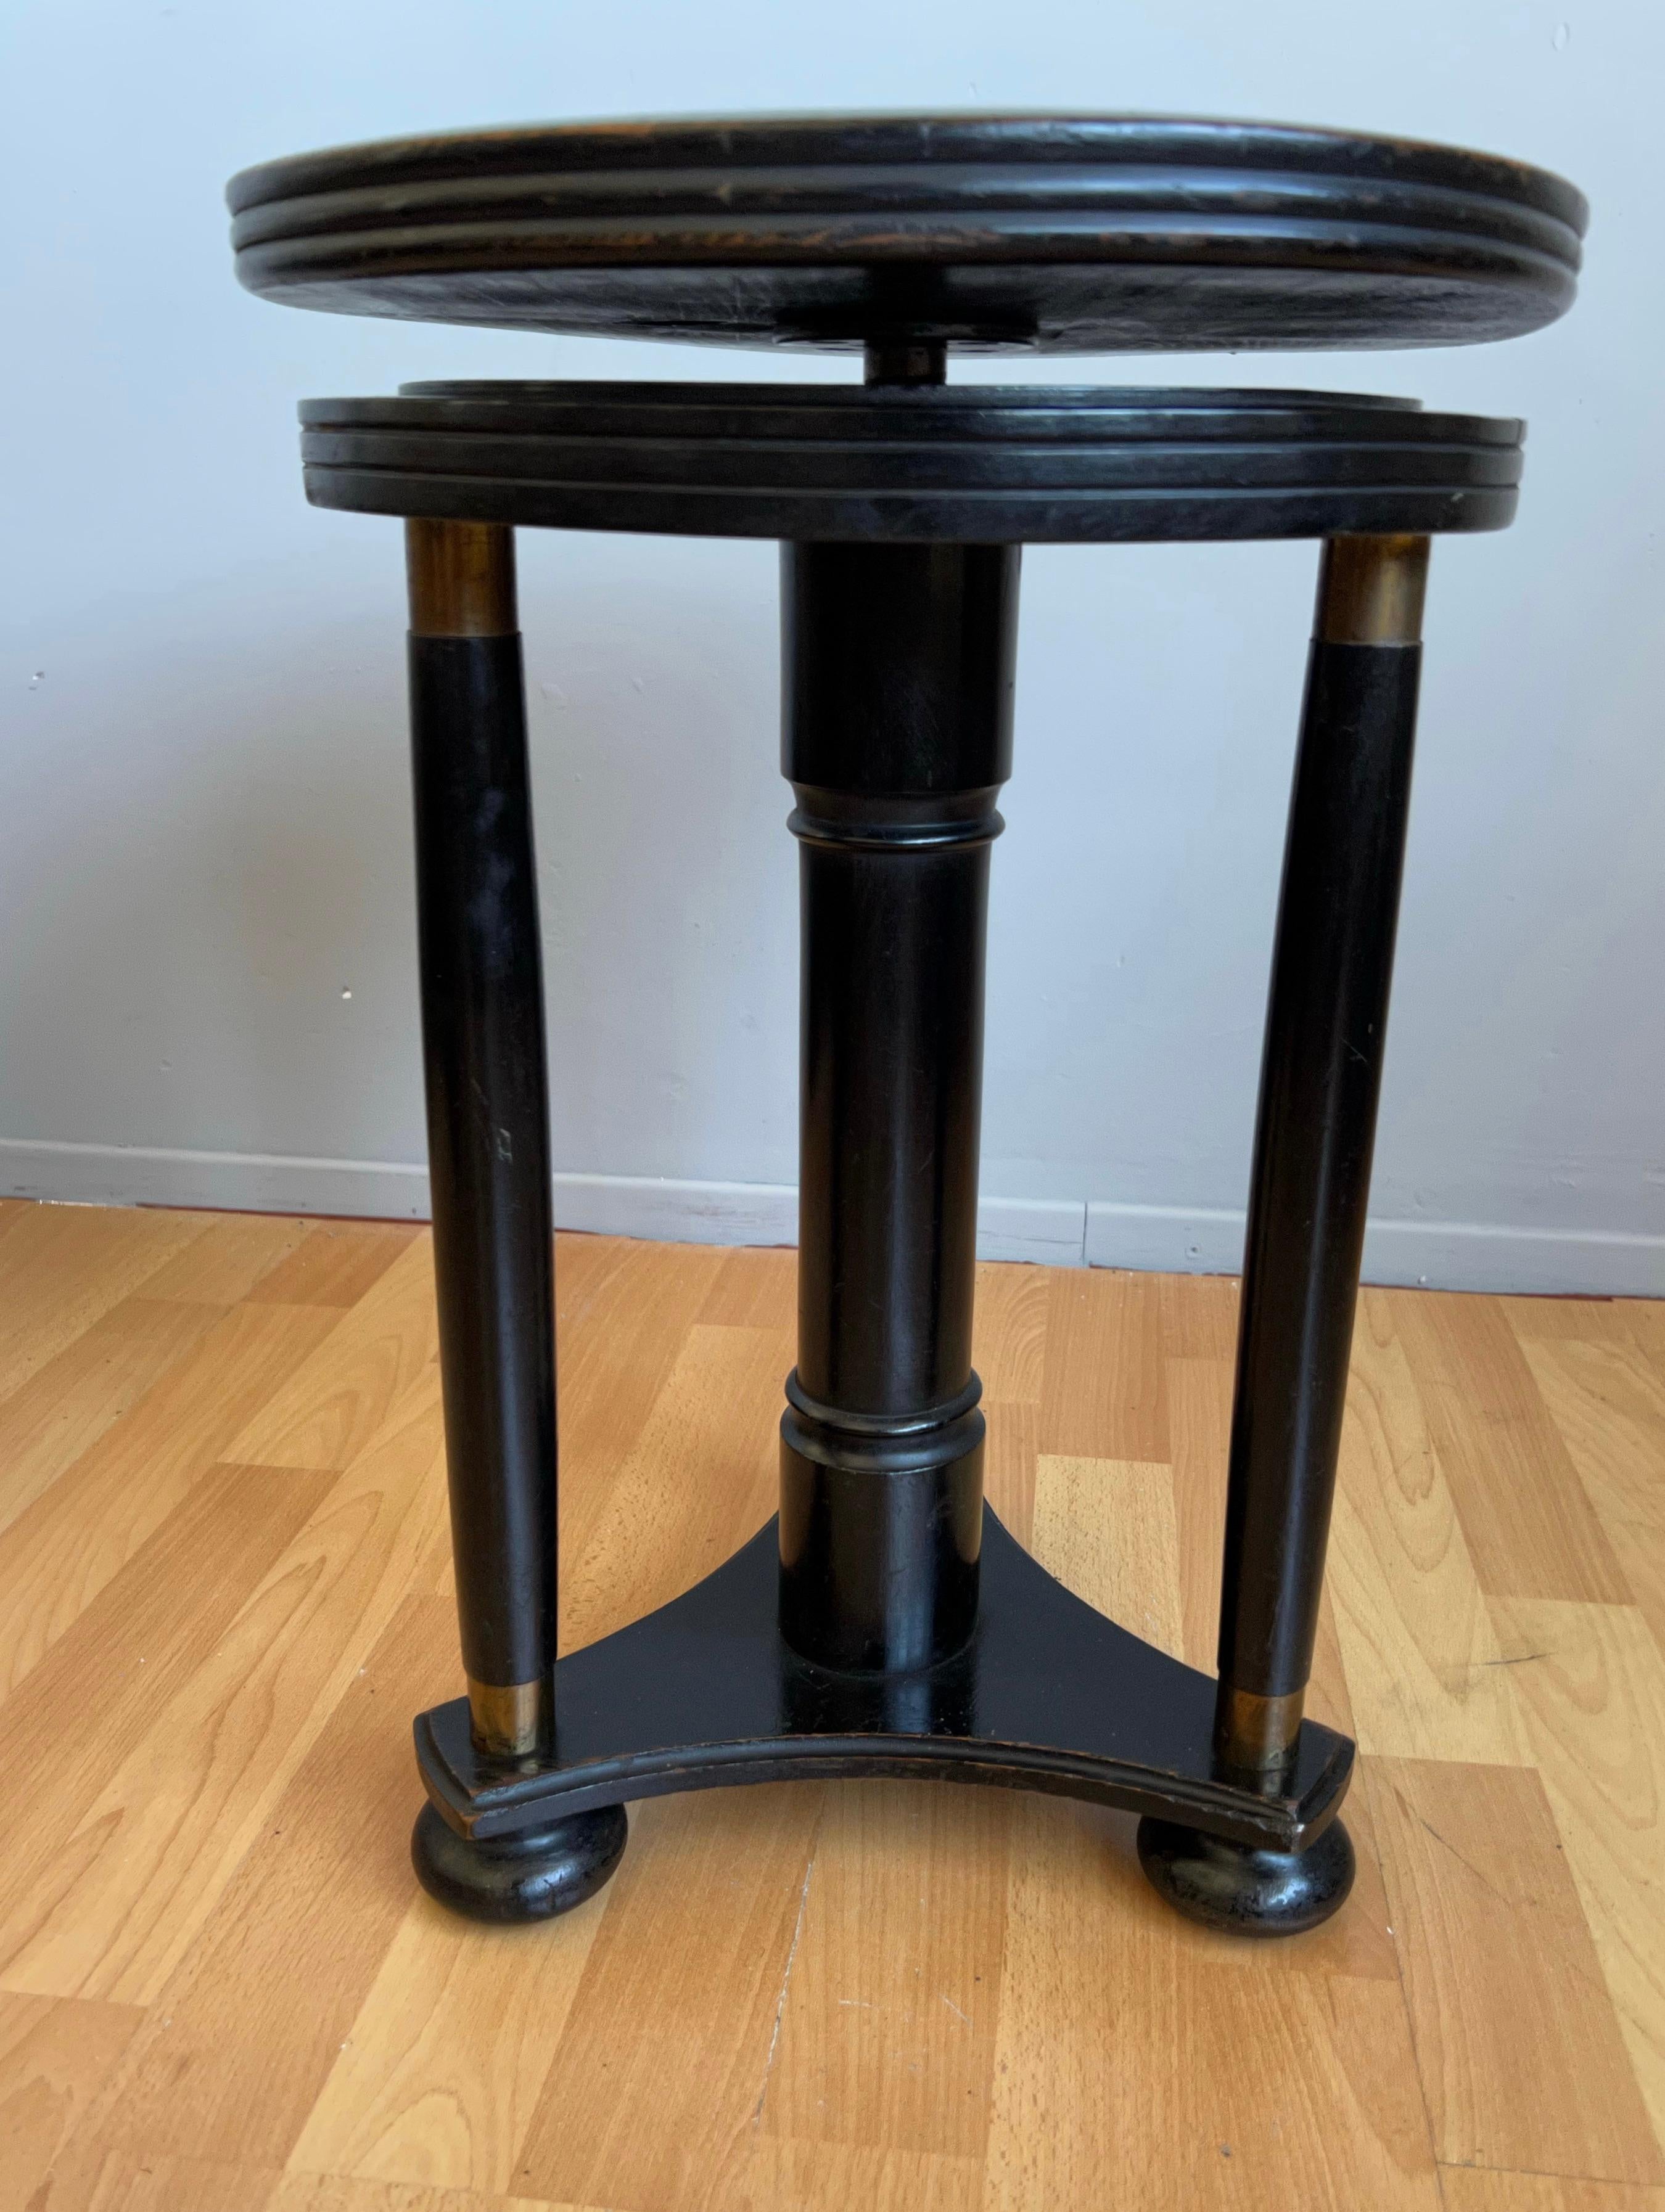 Carved Stylish Blackened Wooden and Brass Art Deco Desk or Piano Swivel Stool, ca 1900 For Sale